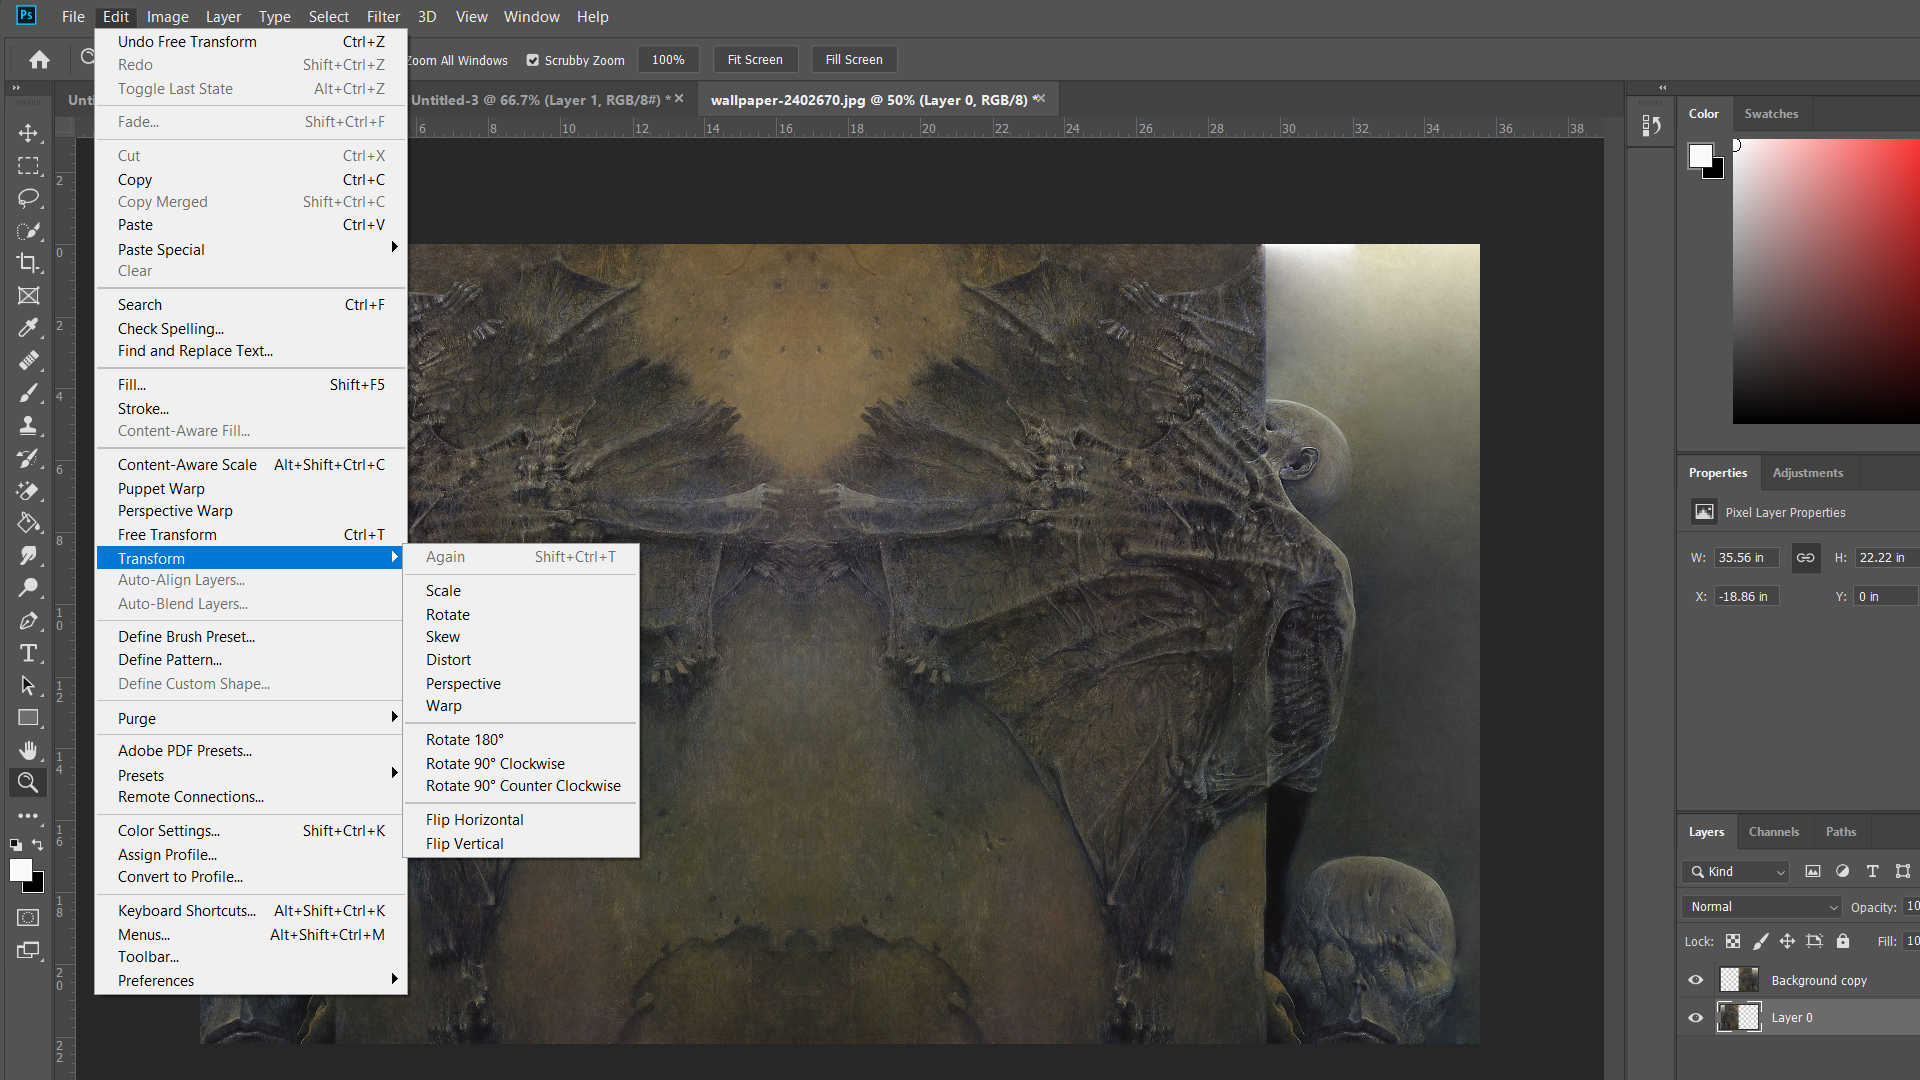 Flipping a layer in Adobe Photoshop